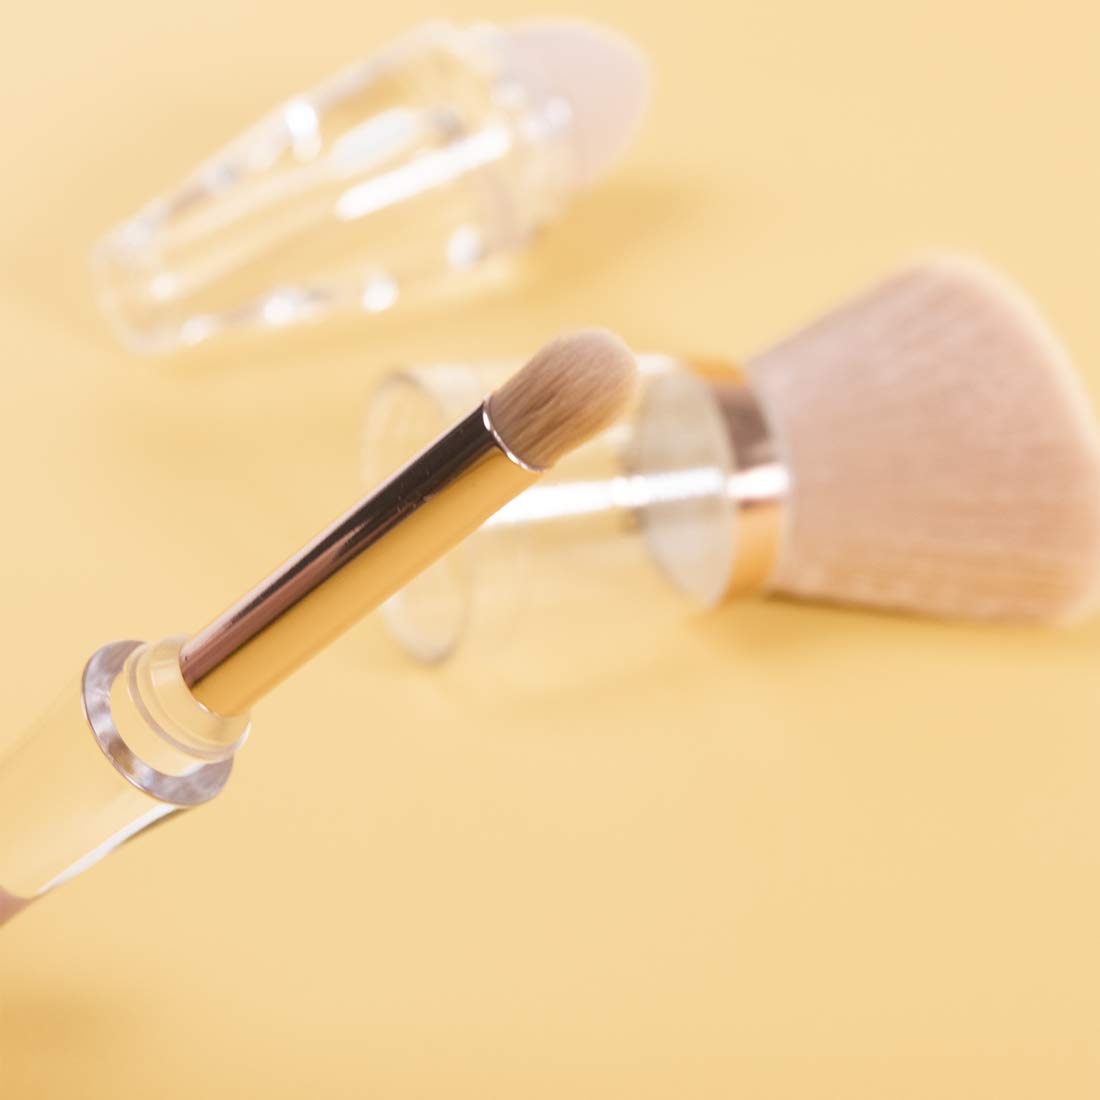 Miniso Mineral Magic 3-in-1 Makeup Brush